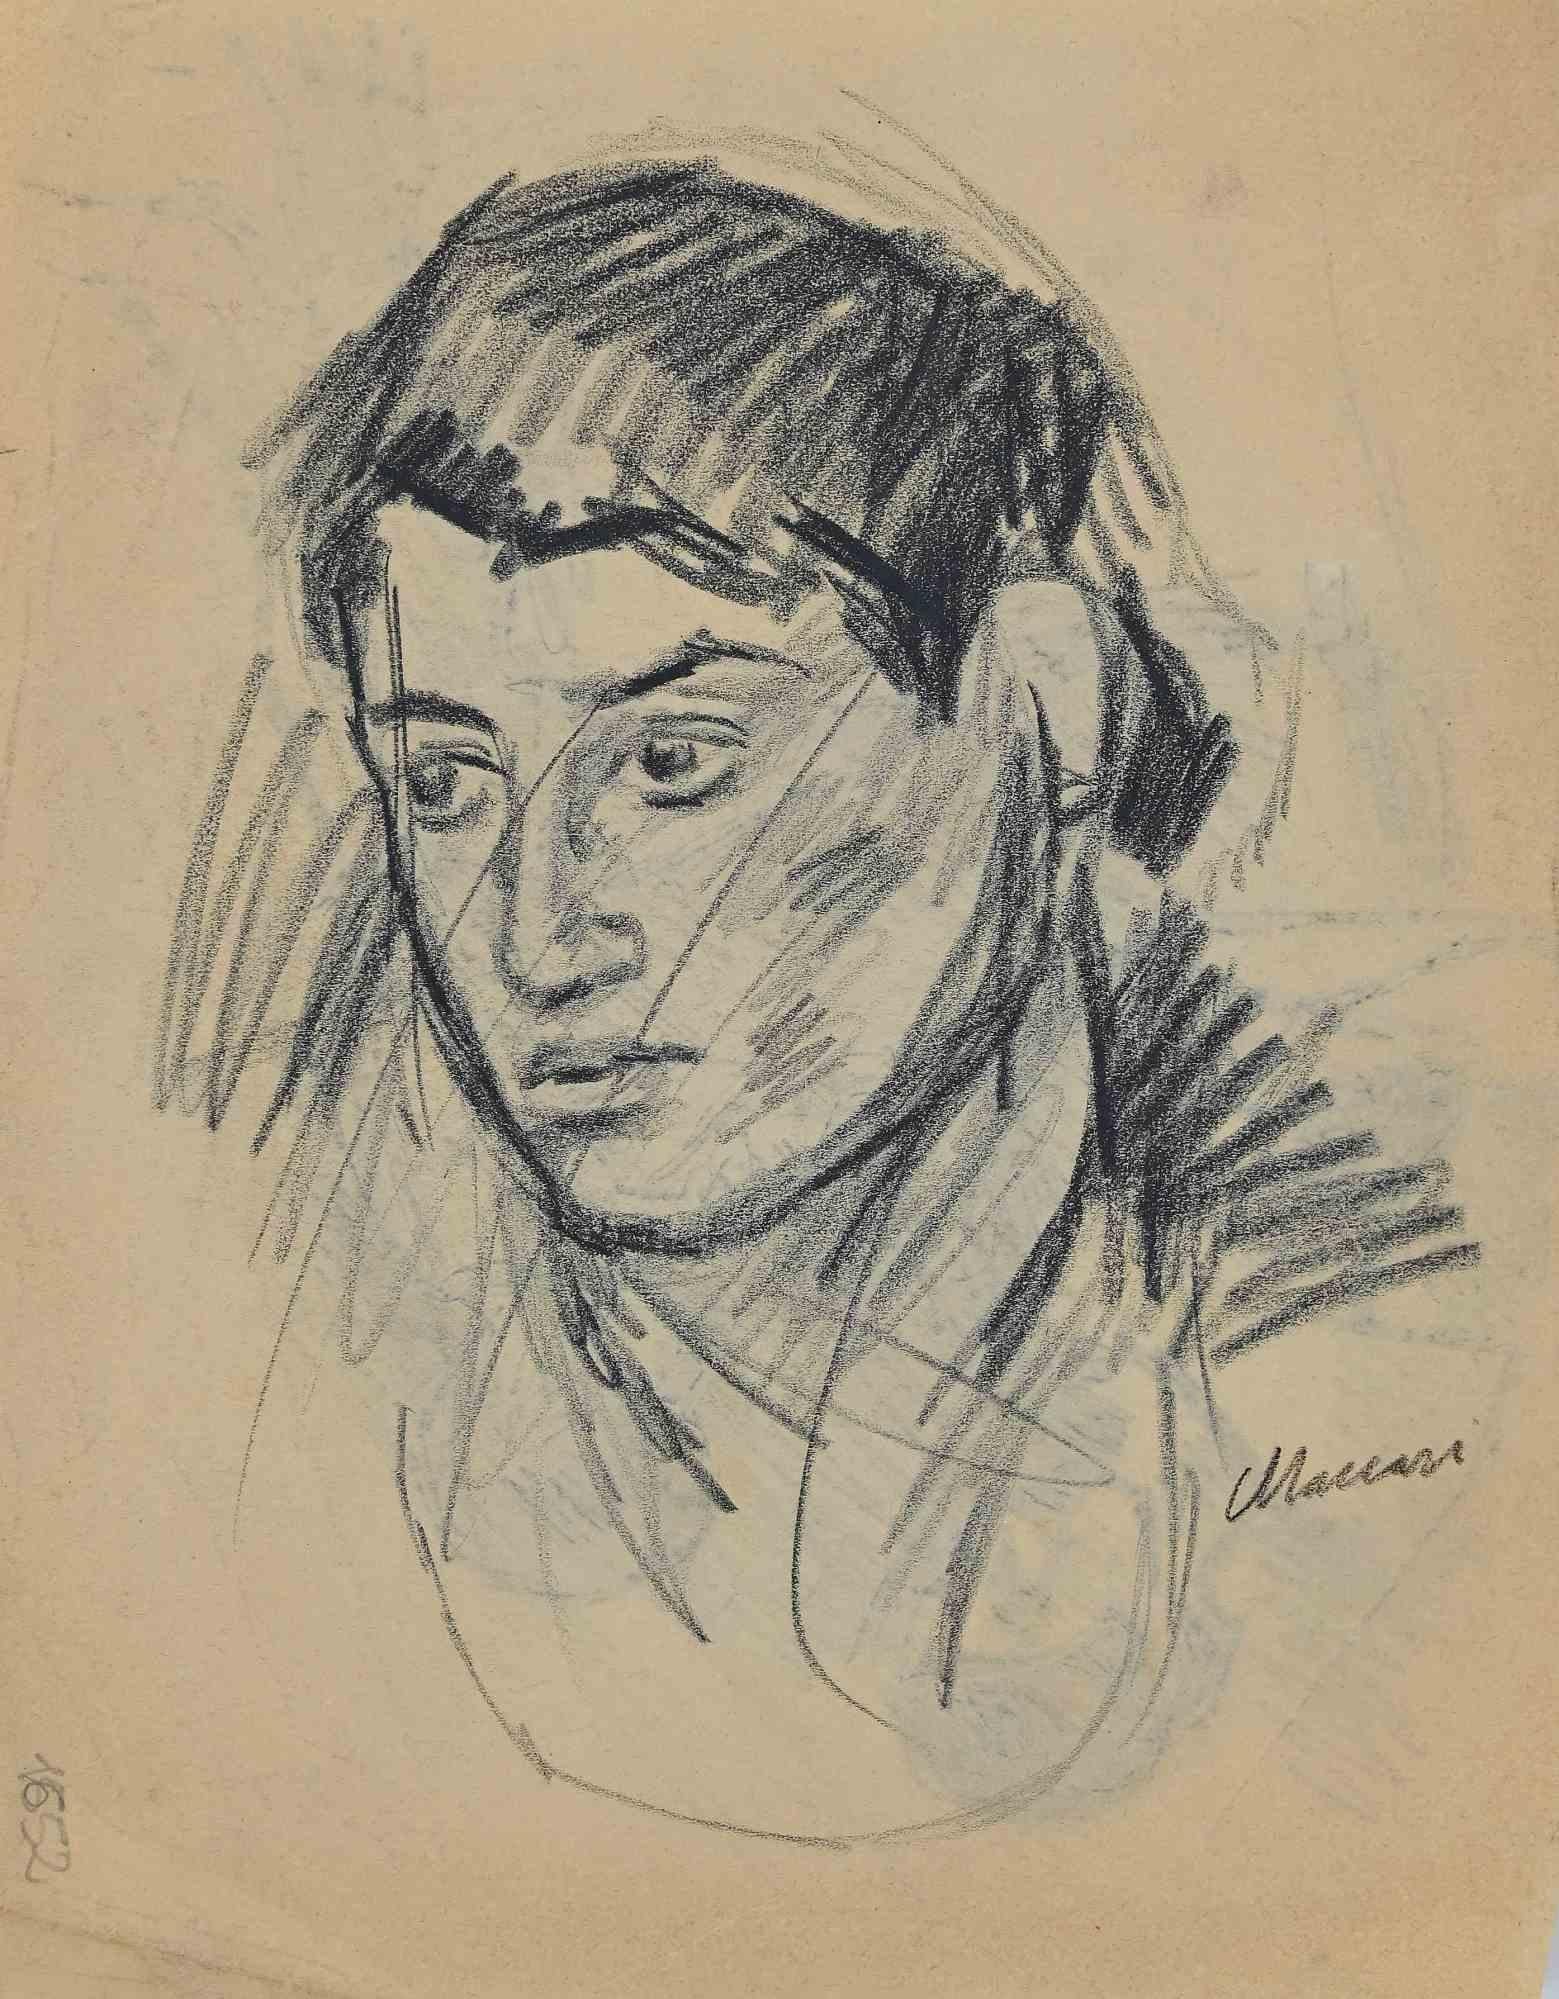 Portrait is an original Charcoal Ink Drawing realized by Mino Maccari in mid-20th Century.

Good condition on a cream colored paper.

Hand-signed by the artist with pencil.

Mino Maccari (1898-1989) was an Italian writer, painter, engraver and